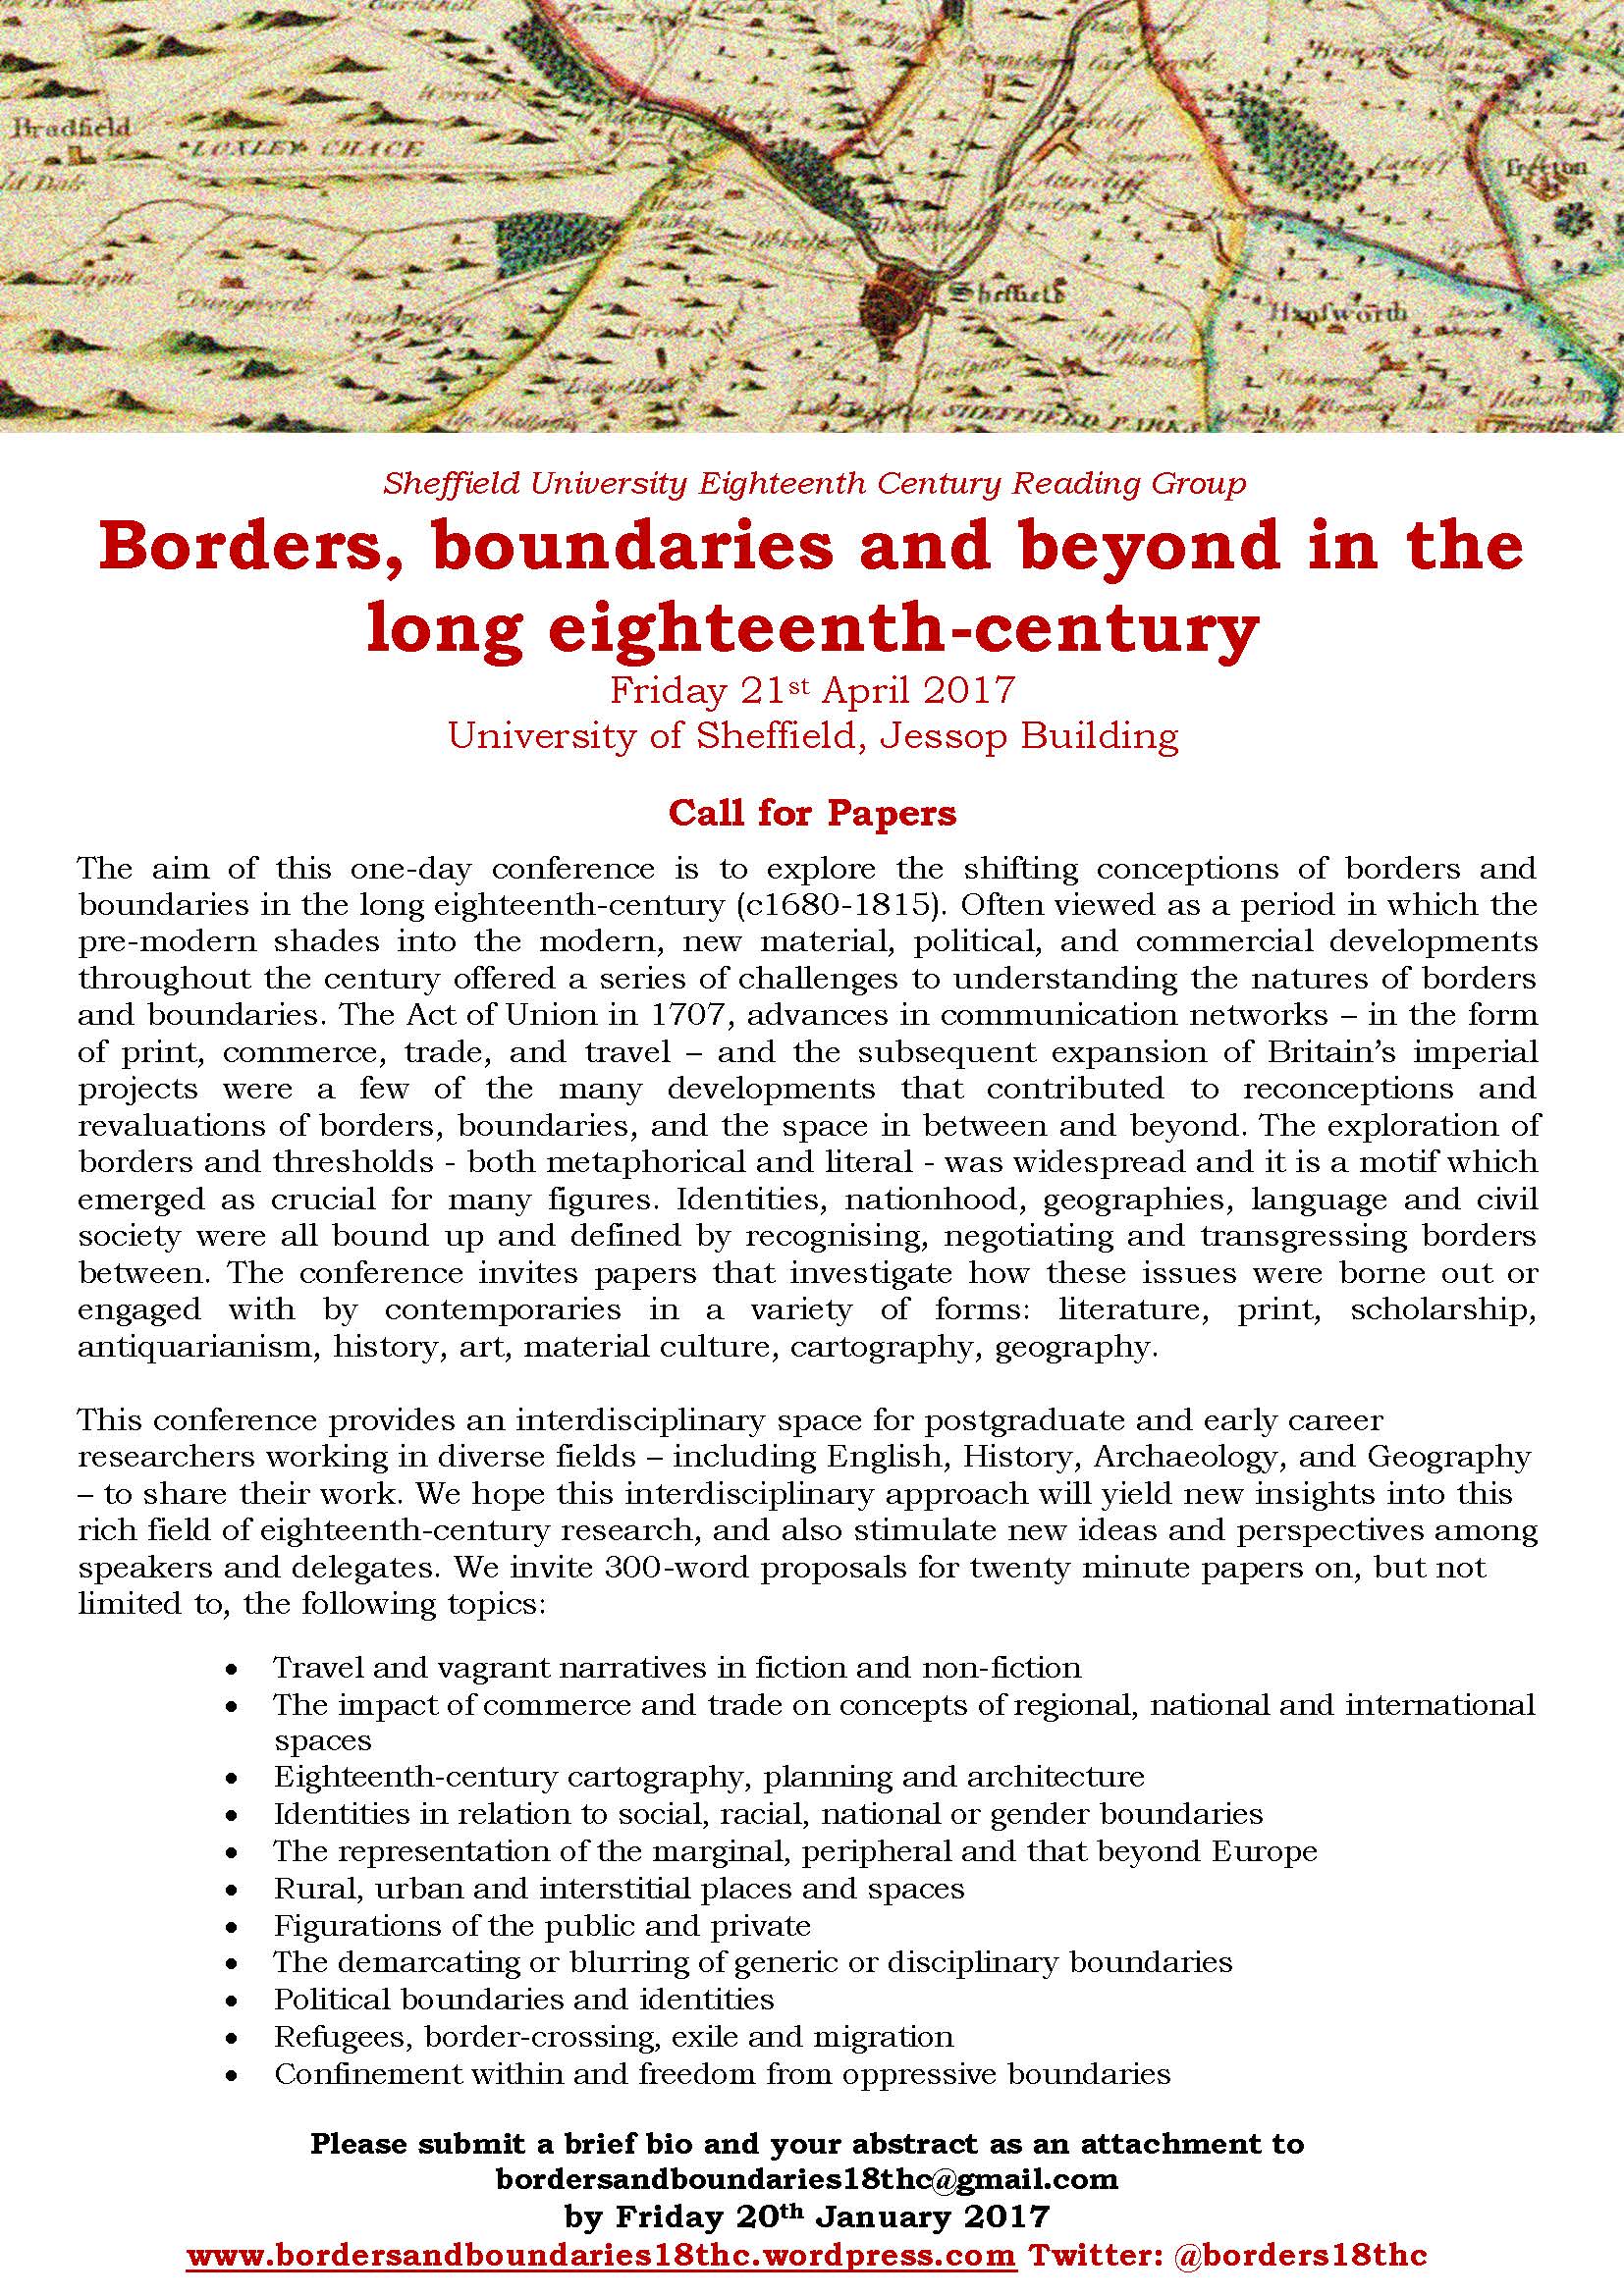 borders-and-boundaries-2017-call-for-papers-002